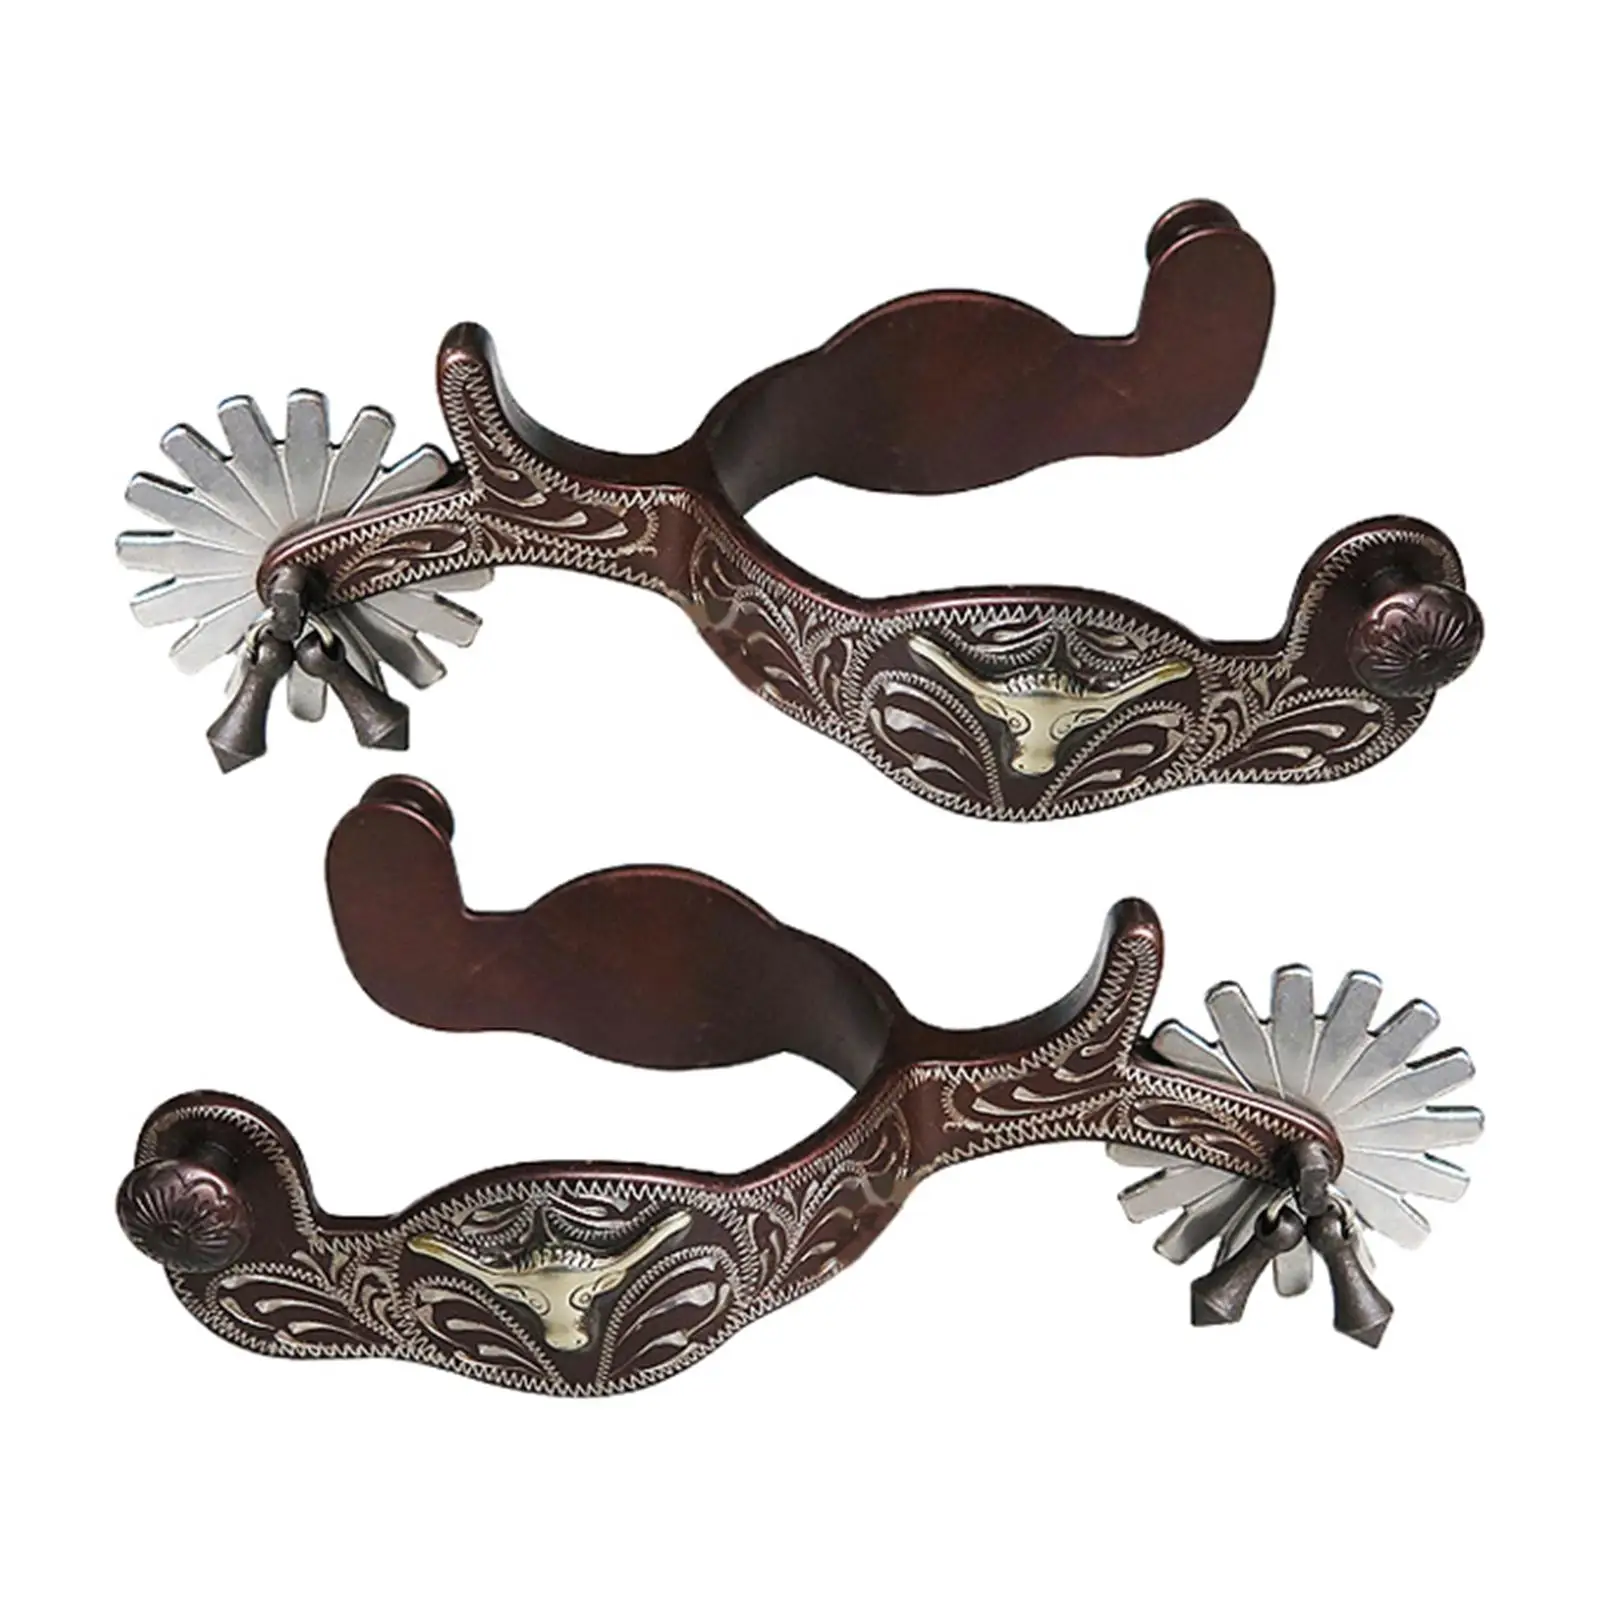 2pcs Horse Riding Spurs Bronzed Western Style Spurs Stainless Steel Hand Carving Encrusted Western Cowboy Spur